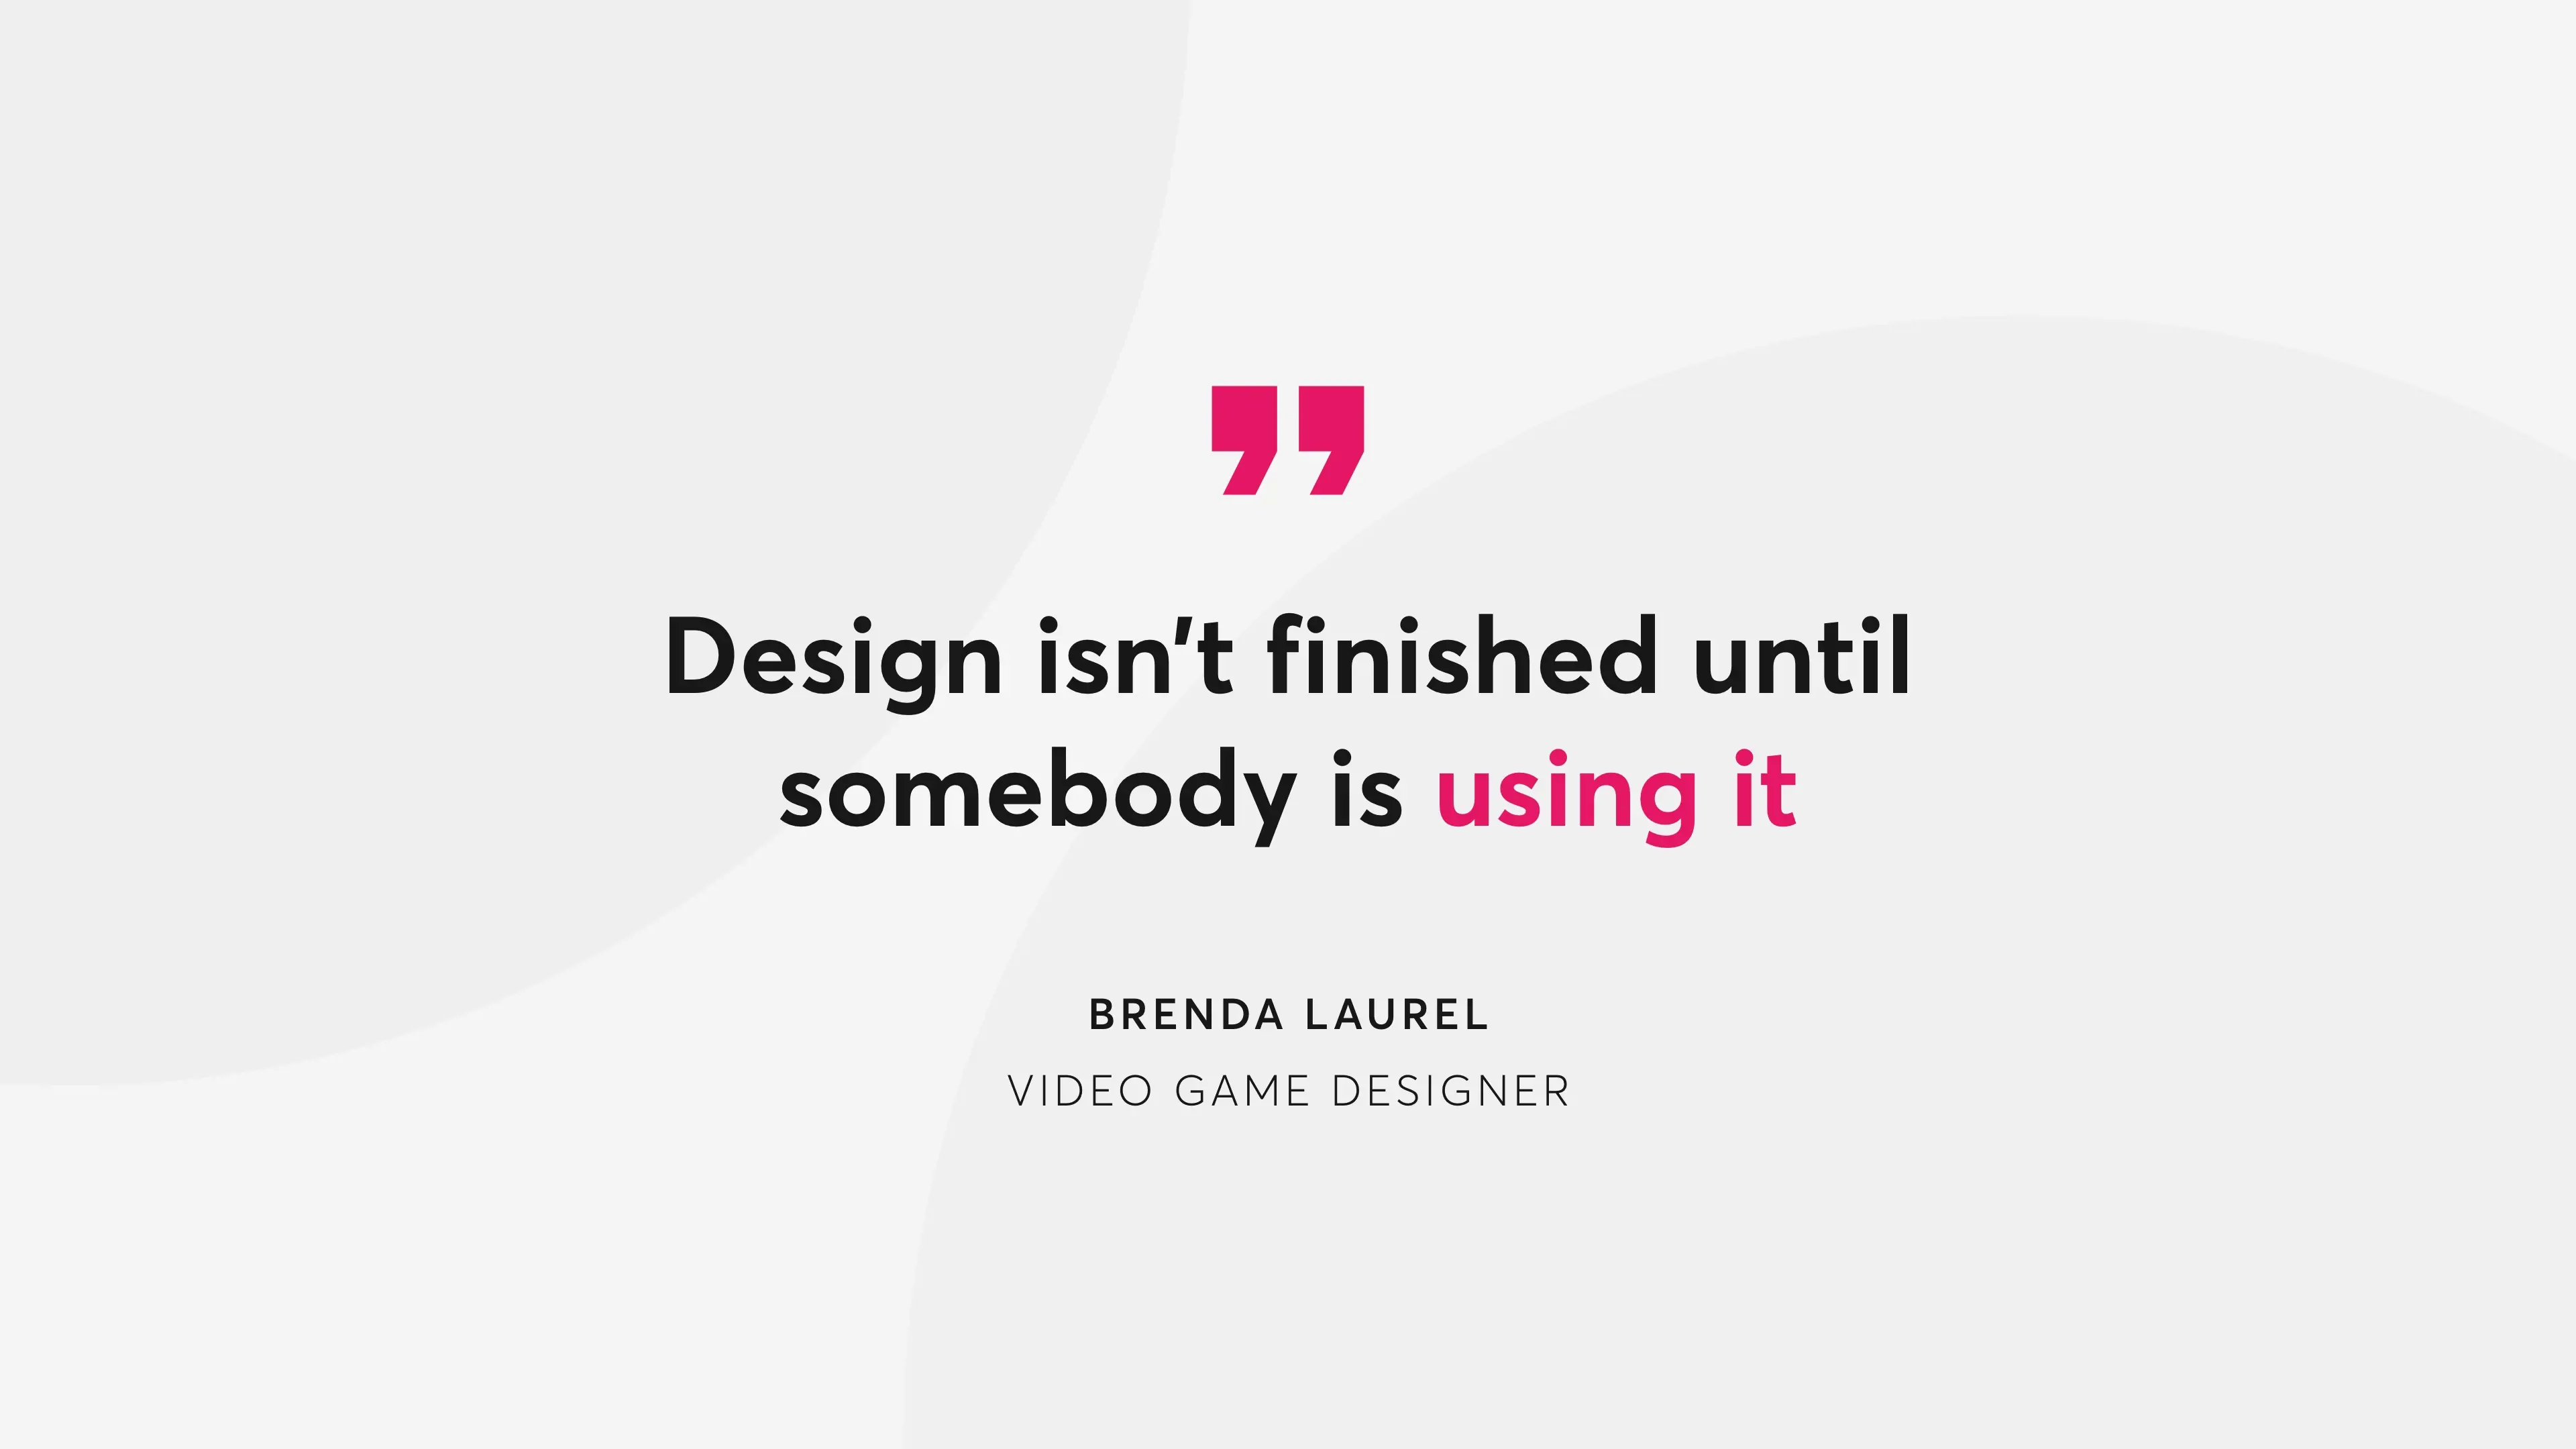 Quote by Brenda Laurel stating "Design isn't finished until somebody is using it"